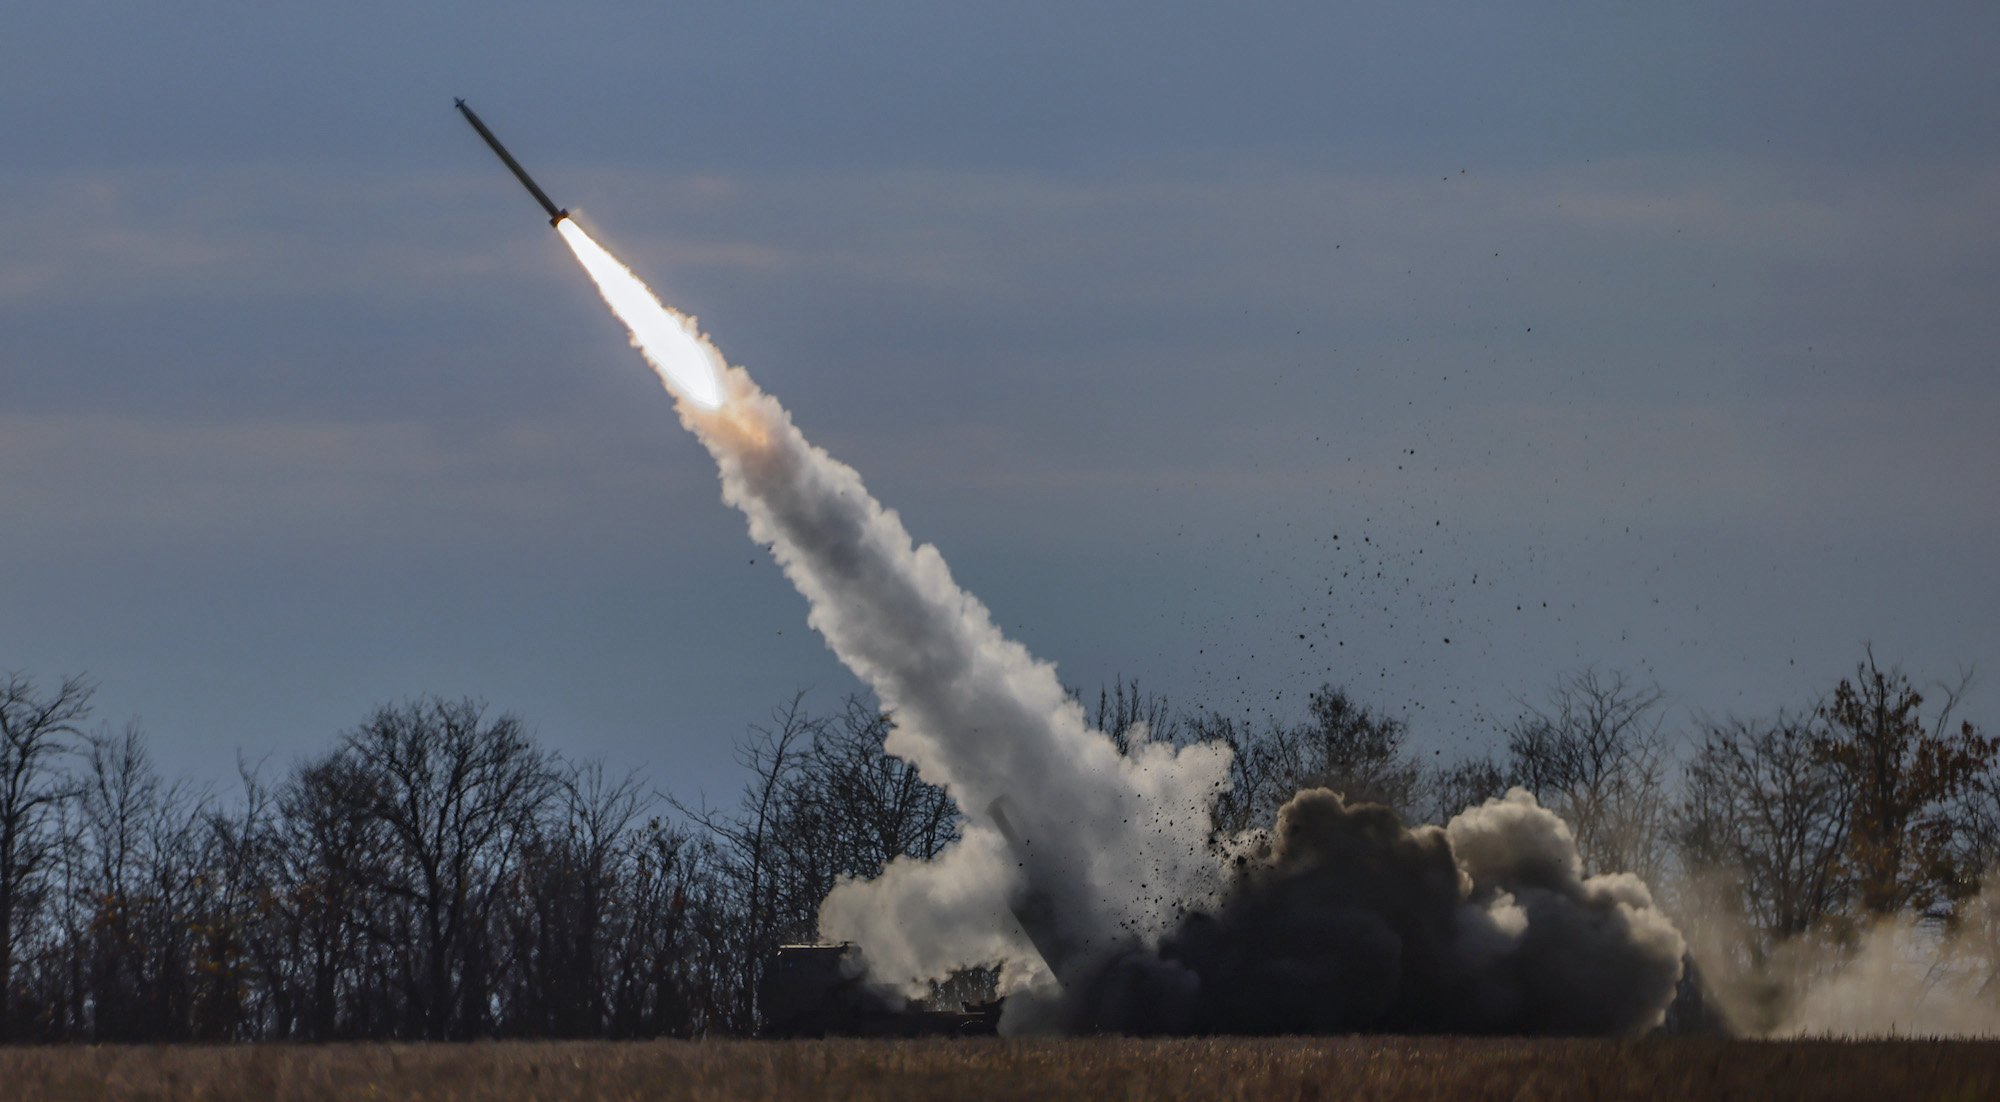 A High Mobility Artillery Rocket System (HIMARS) of the Ukrainian army fires close to the frontline in the northern Kherson region on November 5, 2022.